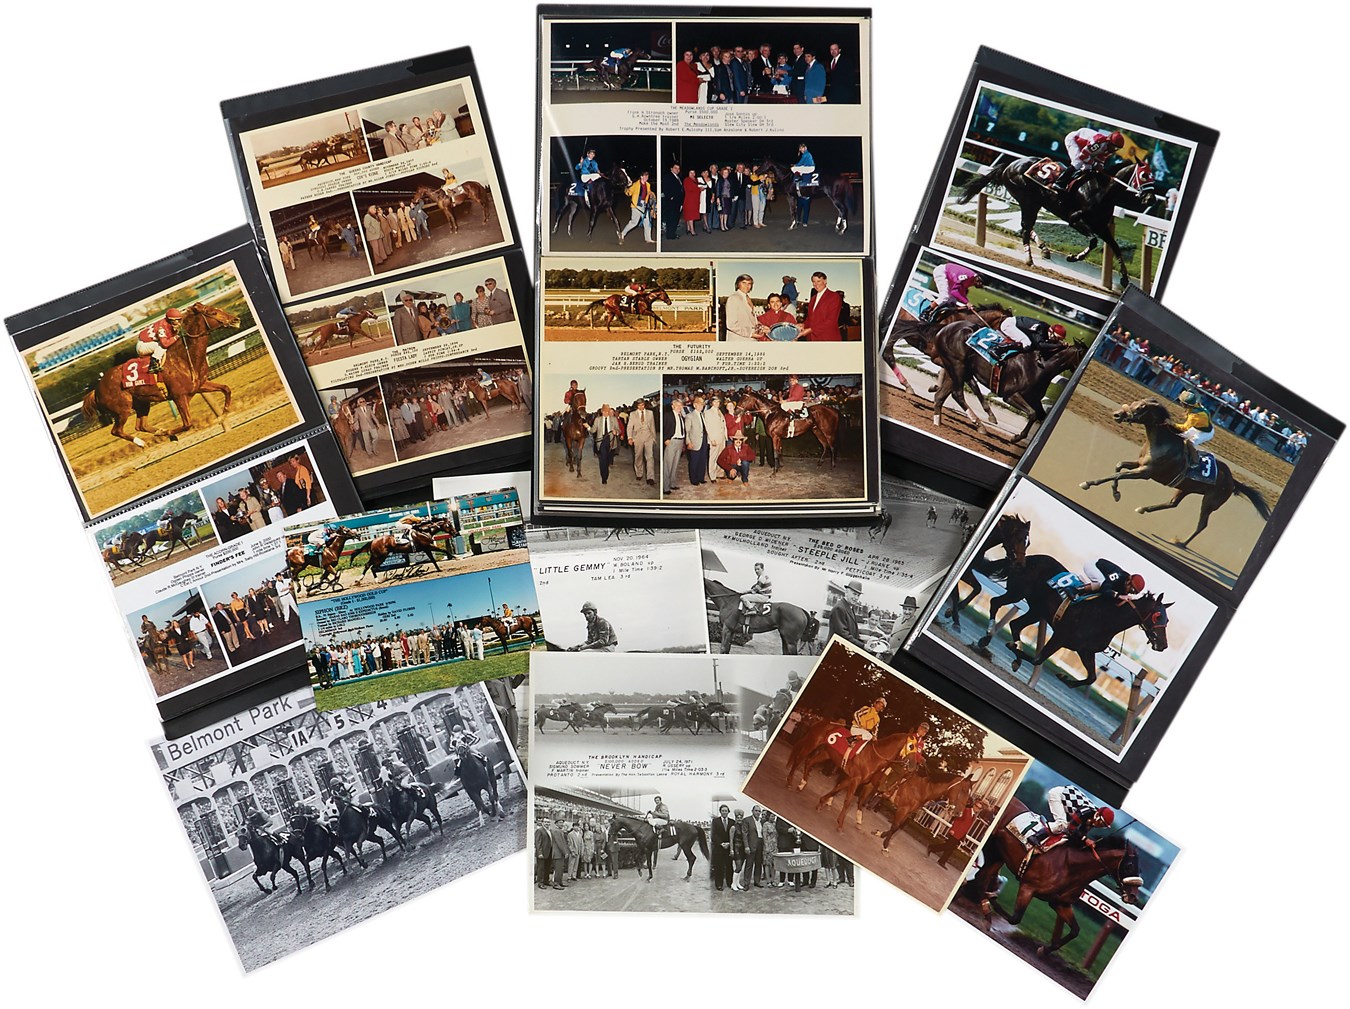 Horse Racing - The NYRA Archive of Horse Racing Photographs (500+)